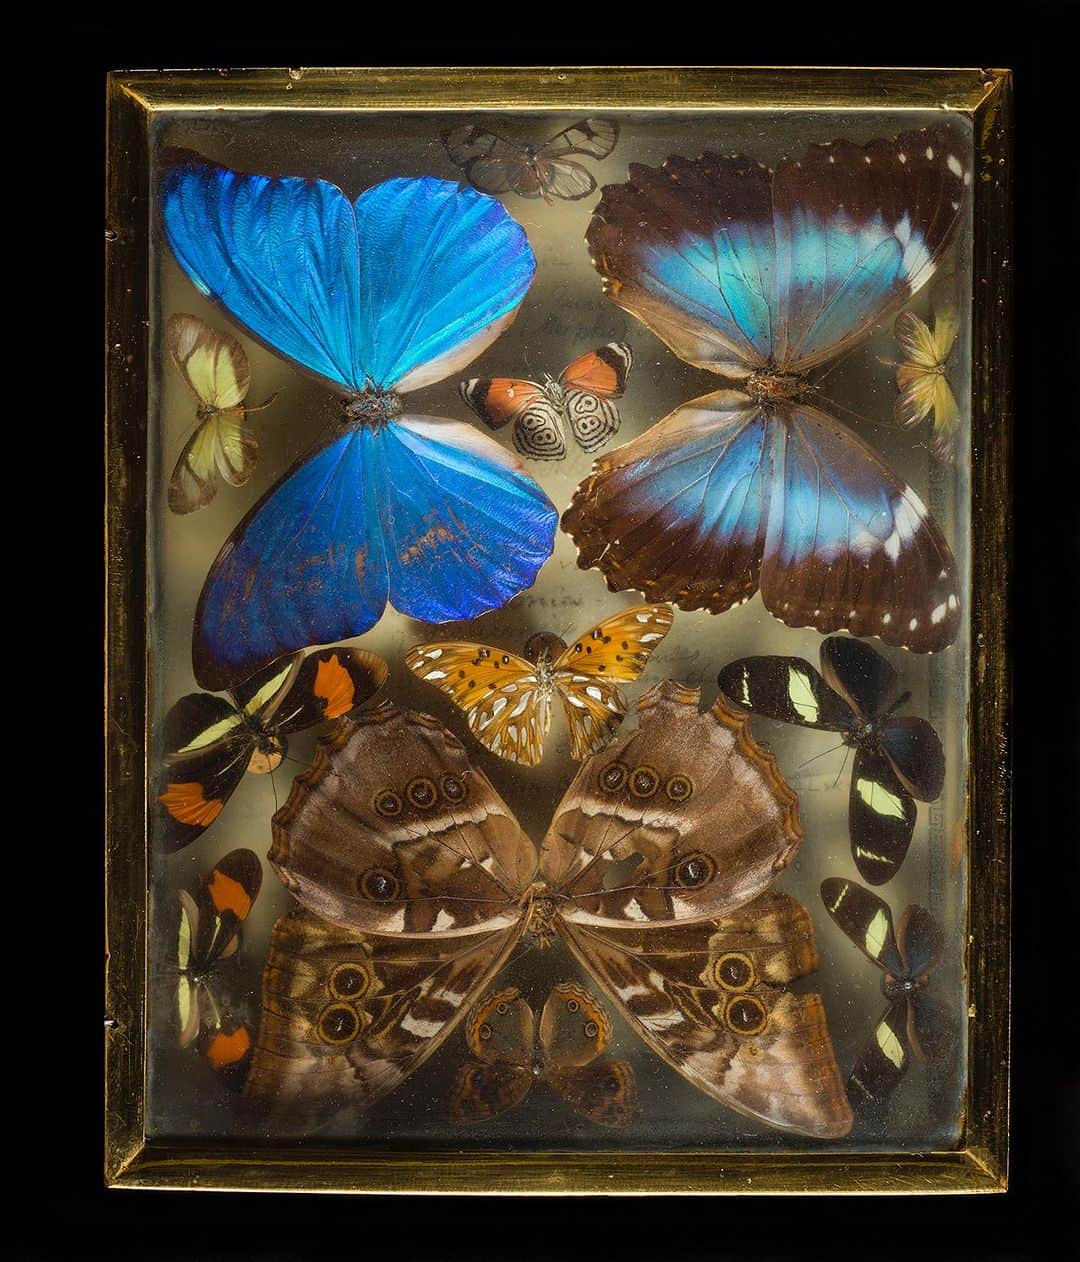 Robert Clarkのインスタグラム：「As I delve into the 100 Terra Bits of photos into my archive I run across images that I, well, frankly have forgotten about.   I had the privilege of shooting the Titian R. Peale Butterfly & Moth Collection, housed at The Academy of Natural Sciences, which is one of the oldest & most quique entomological collections in the Americas. If you are interested in a print or two of these beautiful boxes DM me, I just made two five foot tall prints of the first two pictures in the carousel and I could not be more pleased with the out come.  Peale was an early American naturalist, and a member of a large family of artists & naturalists in Philadelphia. He had an interesting life of examining the natural world, as an early explorer, artist, illustrator, taxidermist & photographic inventor.  His collection #Lepidoptera (butterflies and moths) remained strong & this insect collection remains as a beautiful accomplishments.When he first developed the 'Peale Box' which allowed one to view the specimens from above and below they became the most beautiful to examine the specimens. The last specimens date from 1885, his last year of life. The entire collection remains together in nearly 100 boxes, with additional specimens placed in the main collections of The Academy of Natural Sciences & The Carnegie Museum of Natural History.  The collection was donated to The Academy of Natural Sciences @pennmuseum following Peale's death, and remained relatively unstudied for nearly a century.   I was able to photograph the collection for the #ExelMagazine #DrexelUniversity via the amazing art director #DJPentagram, (DJ Stout) a member of the acclaimed design firm @Pentagram. @DJPentagram.   #mariposa #papillon #borboleta #Farfalla #Motyl #Fluture #Schmetterling #babochka #K'aalo'gii #phyemaleb #meambaw #erveekhei #Hu'die' ##leptir #perhonen #parpar #farasha」